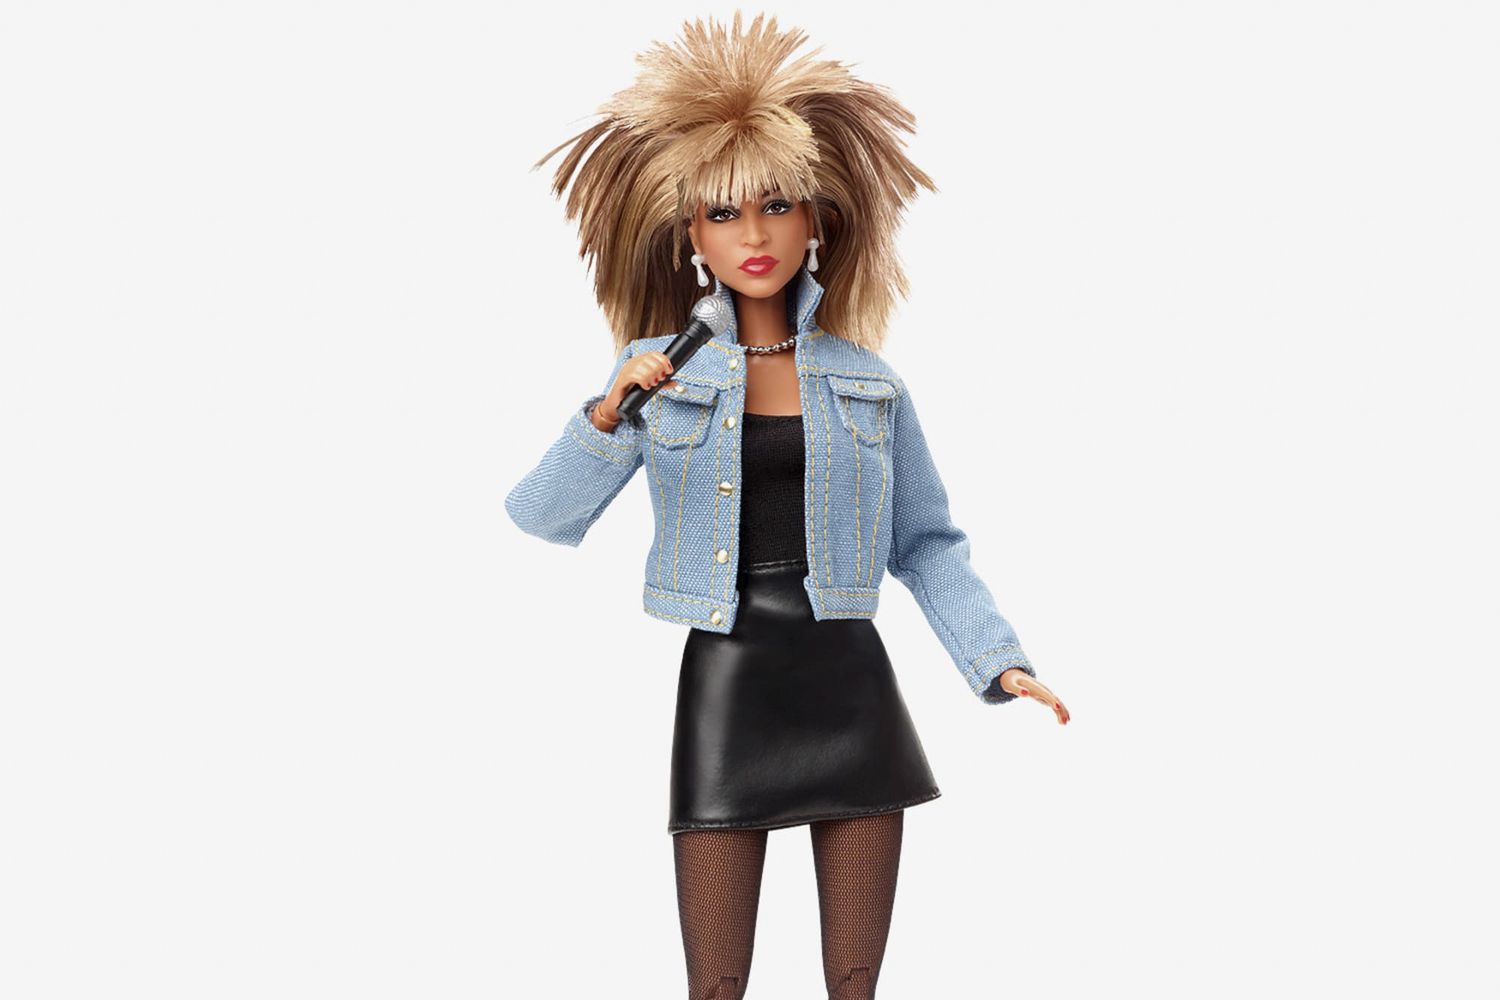 Tina Turner gets Barbie doll from Mattel for song anniversary 